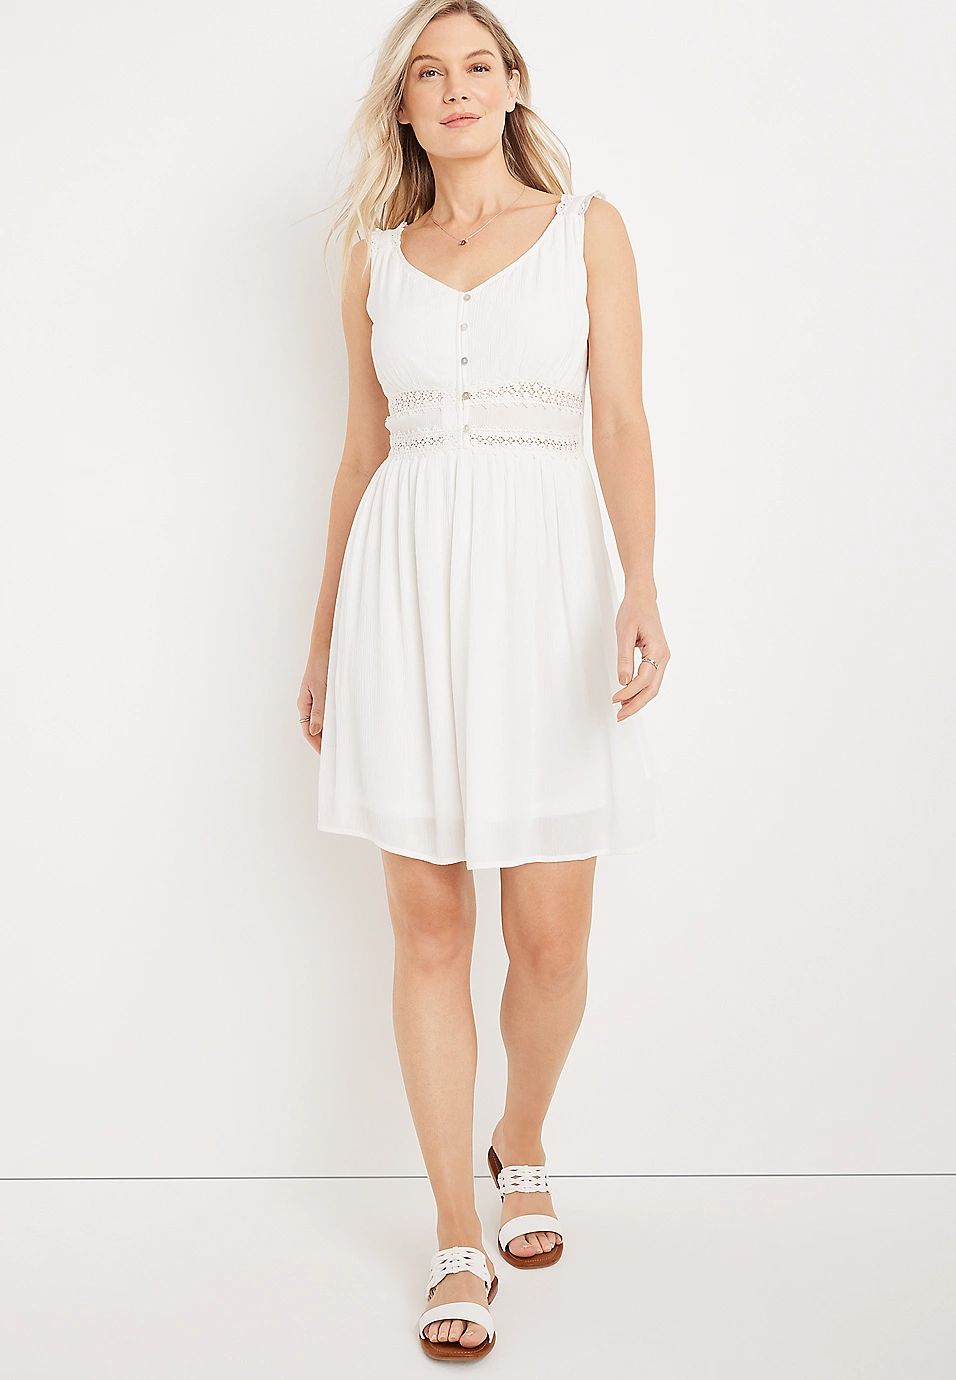 White Lace Babydoll Mini Dress | Maurices